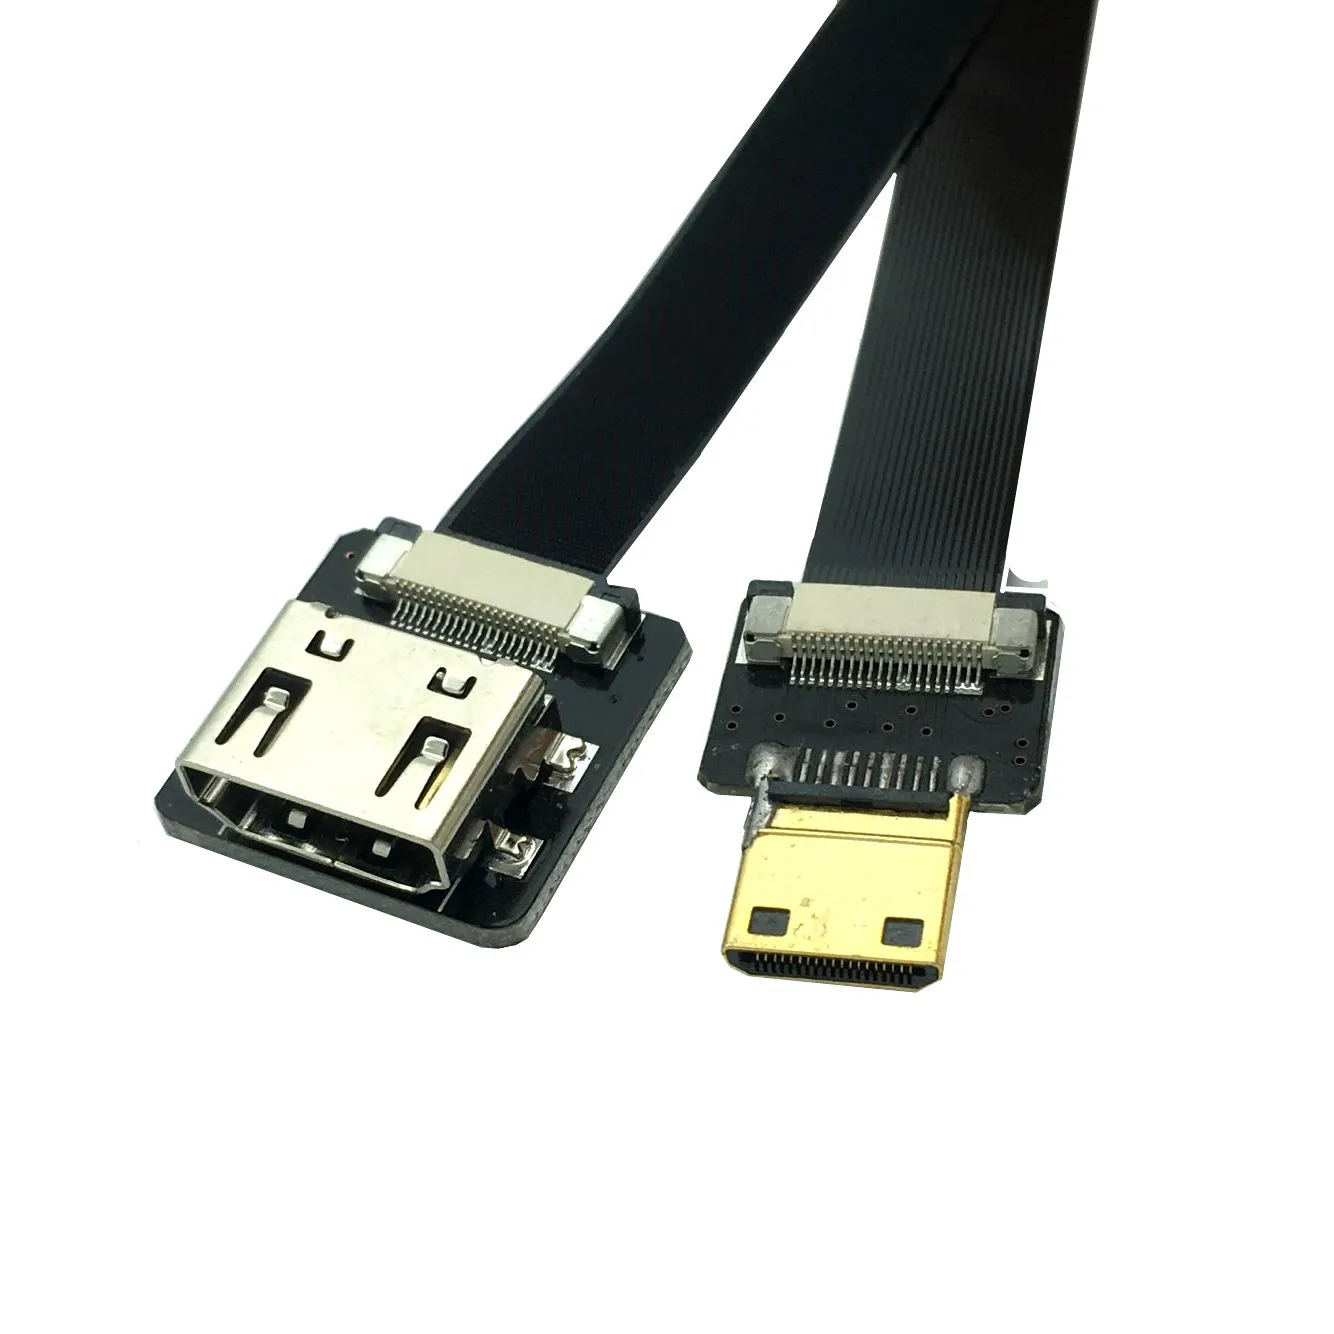 

FPV HDMI-compatible Female to Mini HDMI-compatible Male FPC Flat Cable for Multicopter Aerial Photography 0.1m/0.2m/0.5m